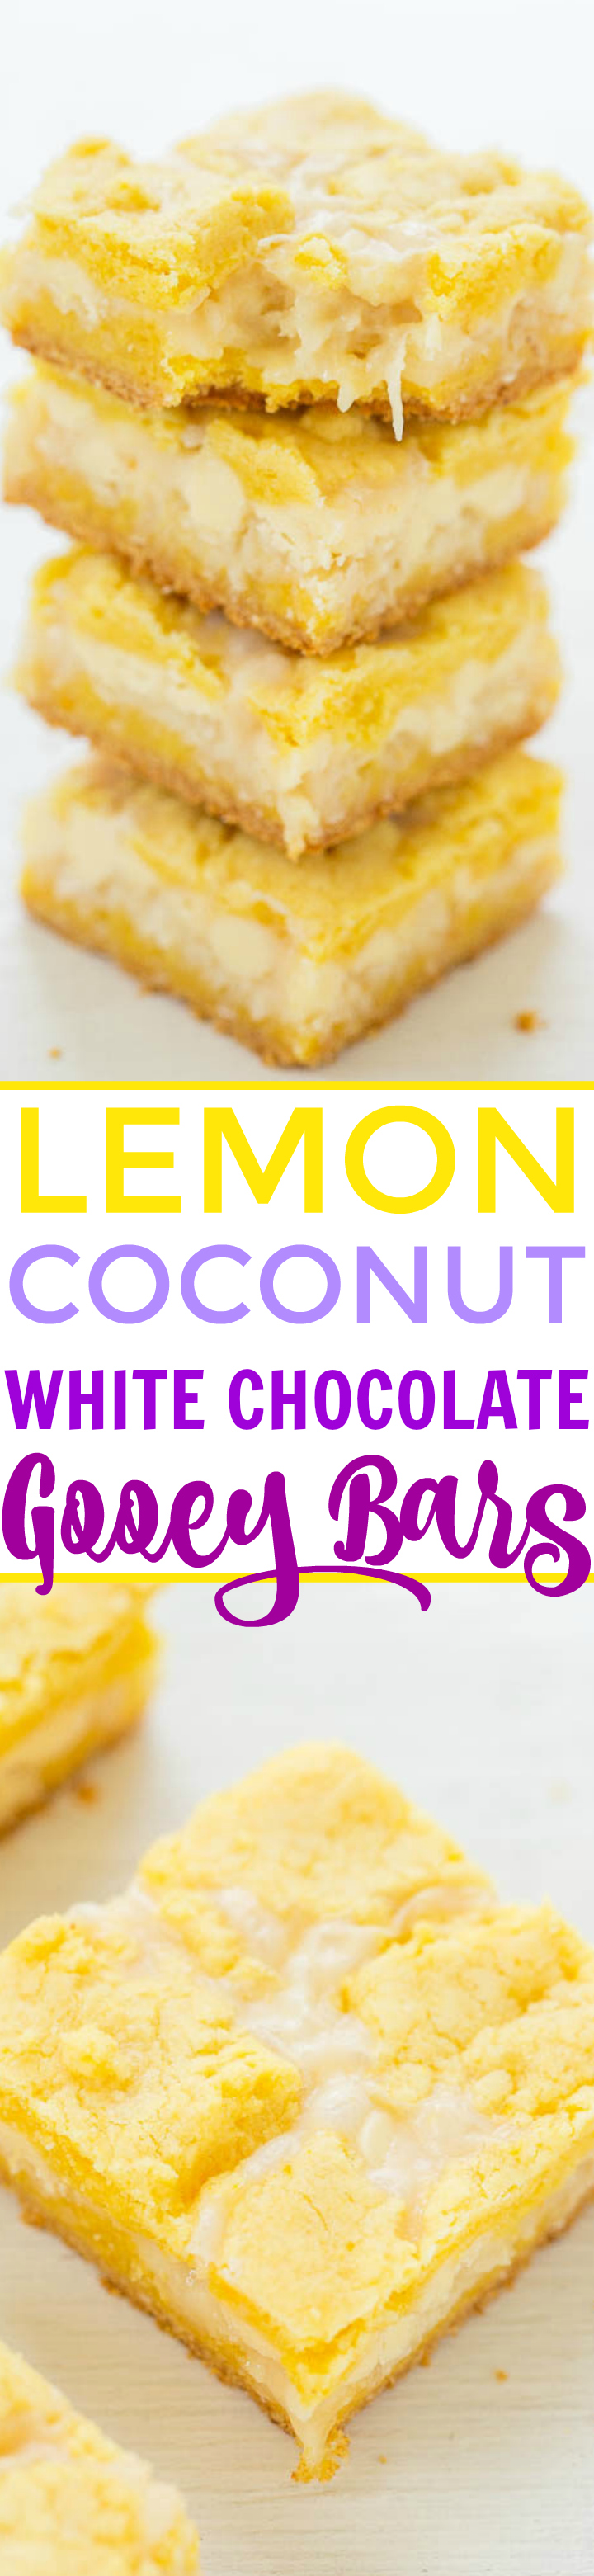 Gooey Lemon Coconut Bars — If you like traditional lemon bars, you'll LOVE this EASY recipe for soft, chewy, and oh-so-gooey lemon bars!! Loaded with white chocolate and coconut!!